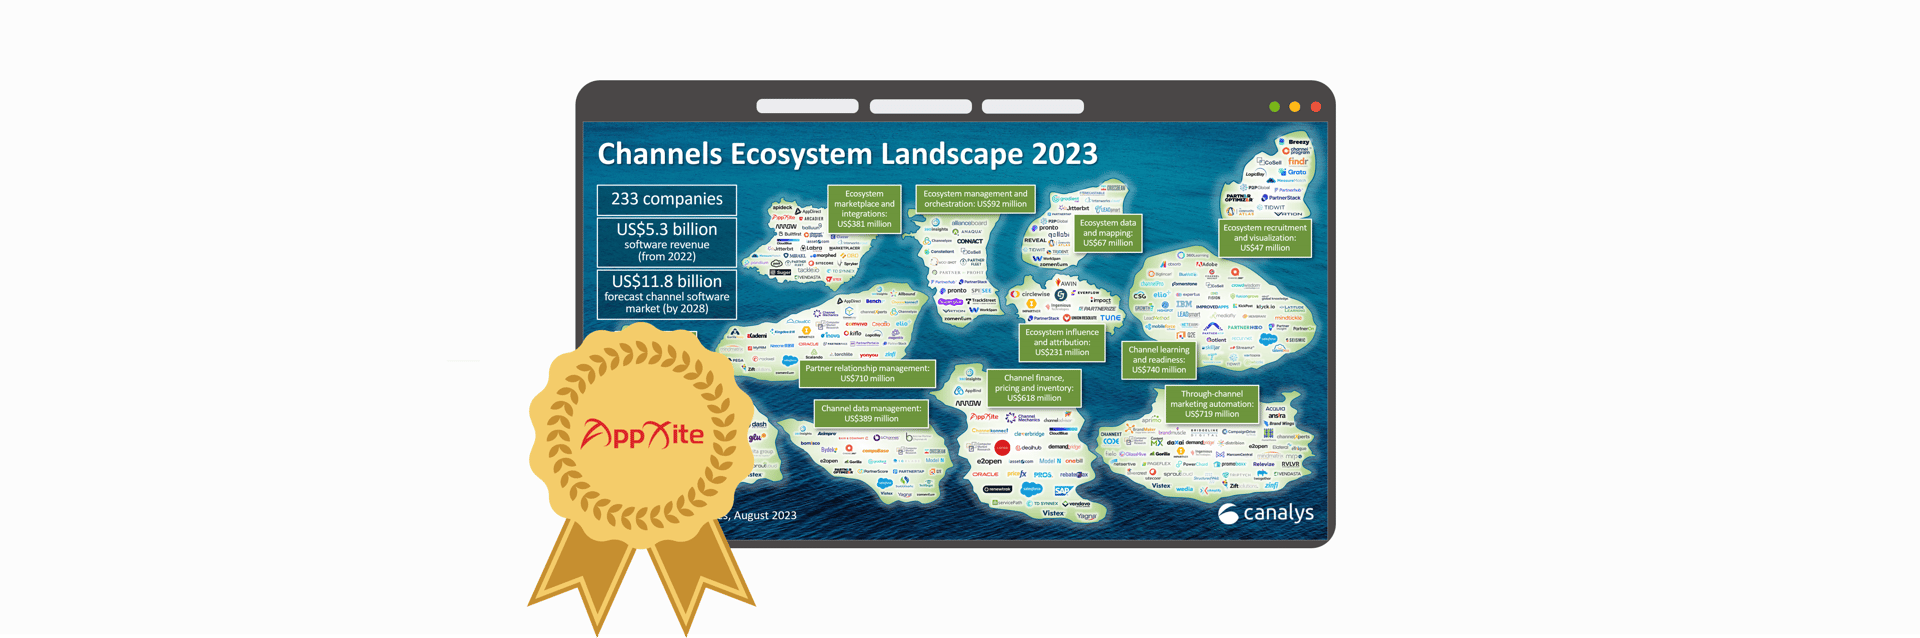 AppXite is Recognized in Canalys Channels Ecosystem Landscape 2023